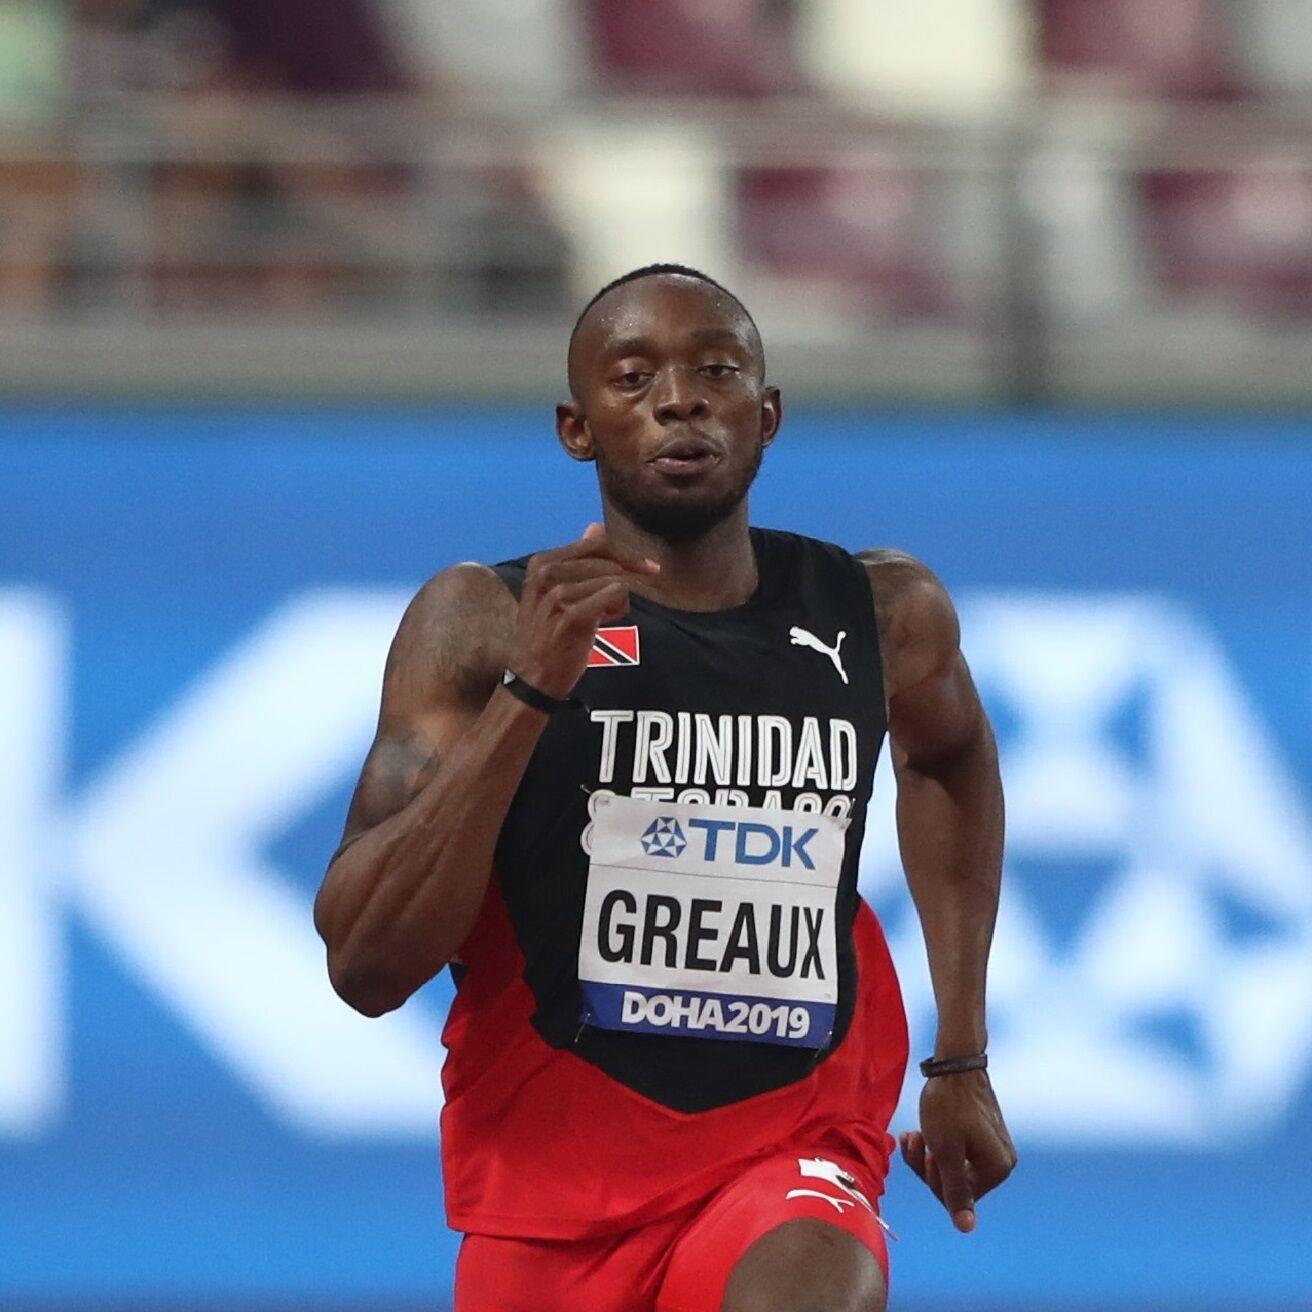 KEEN TO INFLUENCE: Trinidad and Tobago sprinter Kyle Greaux.  Getty Images for World Athletics